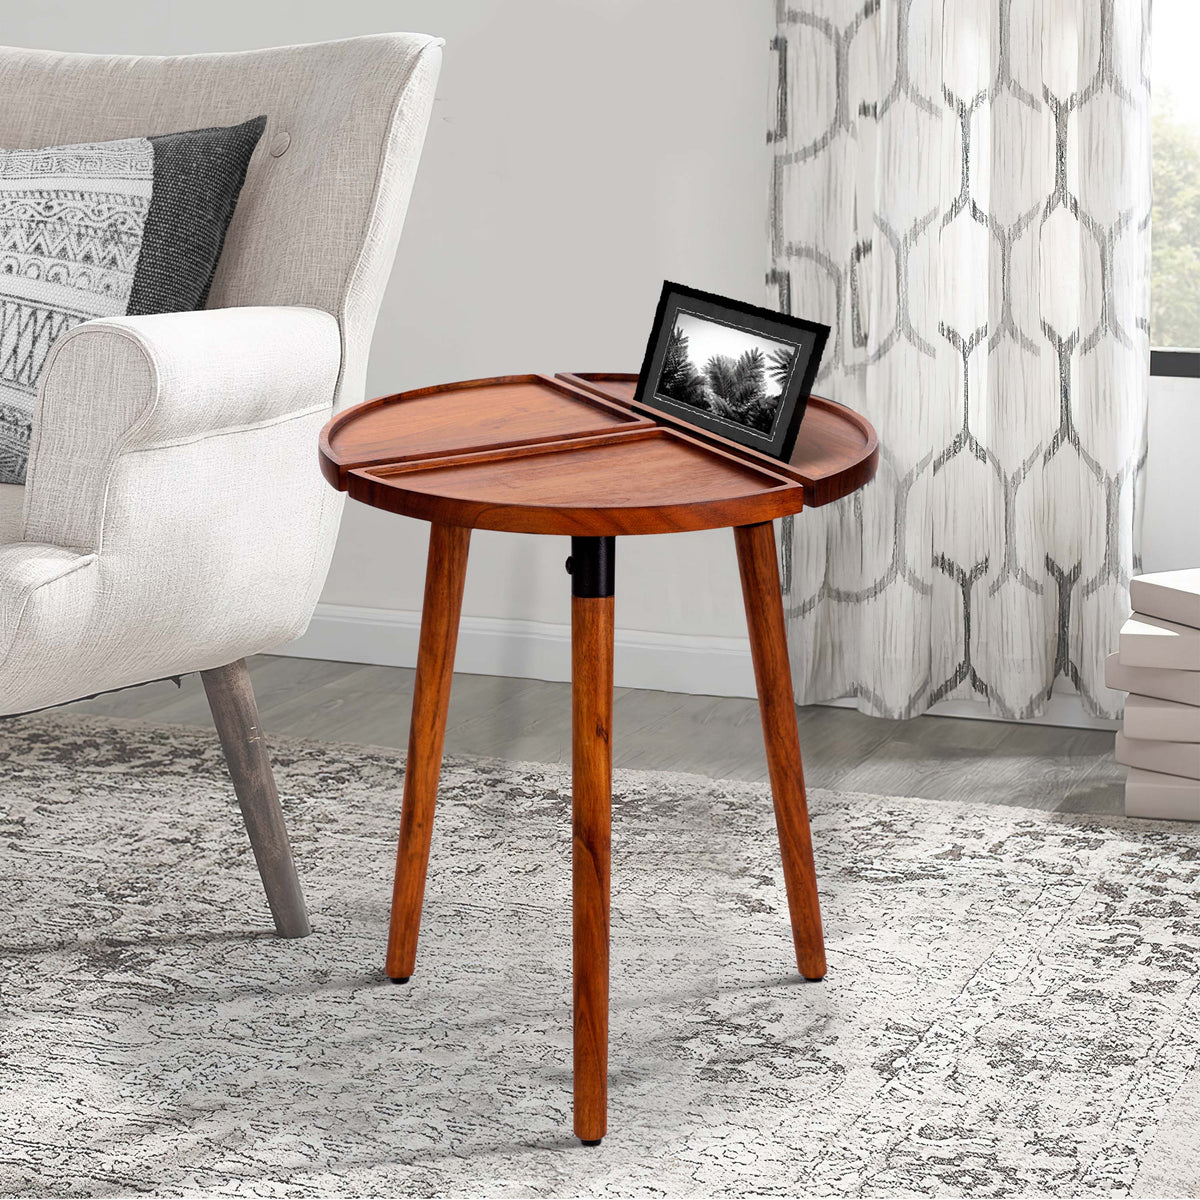 18 Inch Round Acacia Wood Side Accent End Table with 3 Tabletop Sections, Warm Brown - UPT-272009